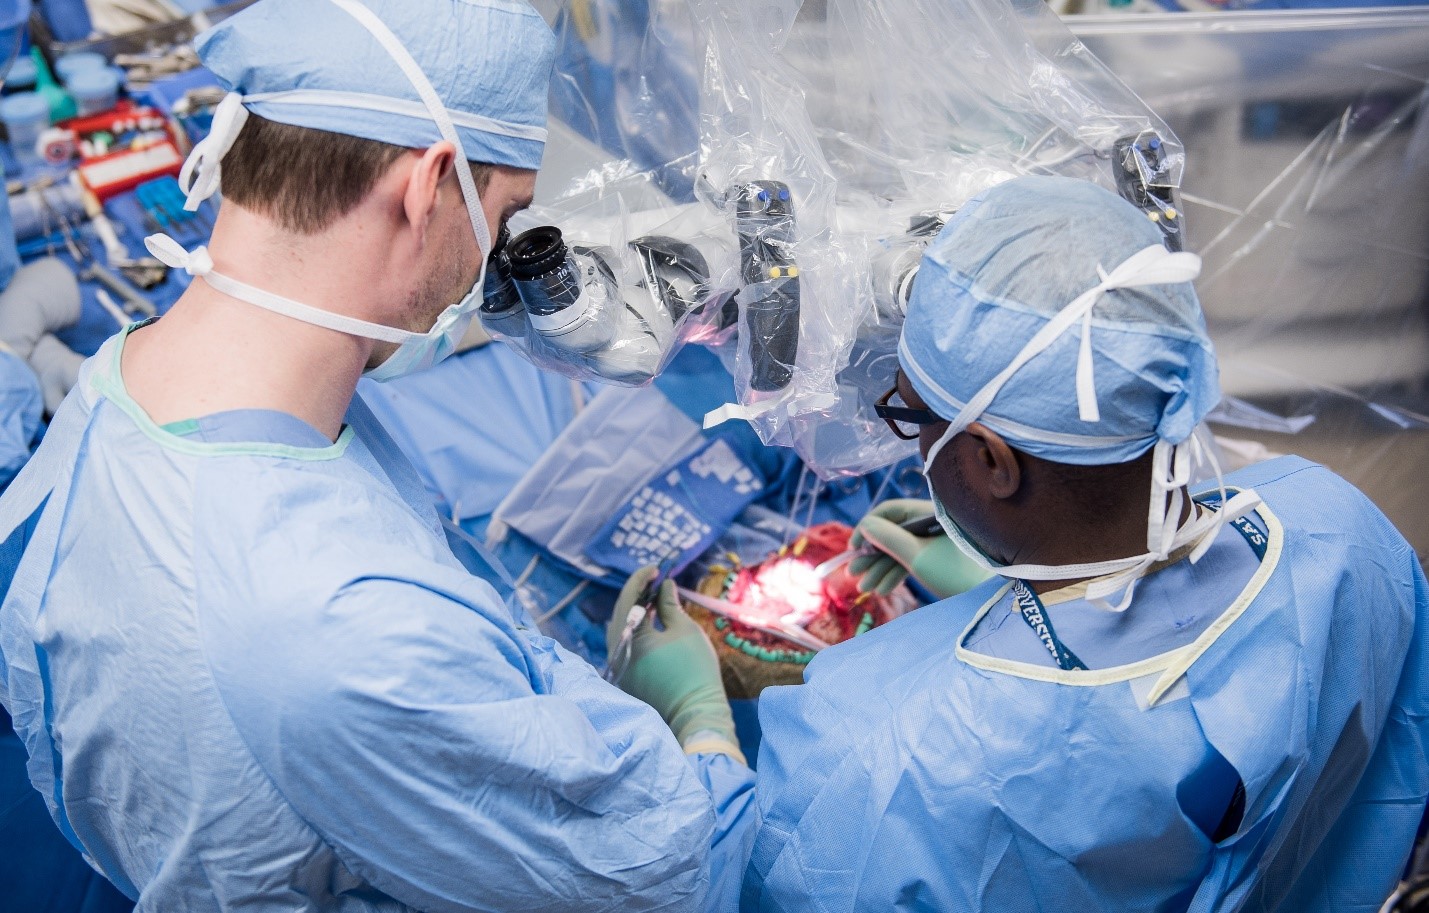 Clinical Neuroscience in Action: Neurosurgery’s Contribution to Mapping the Human Brain